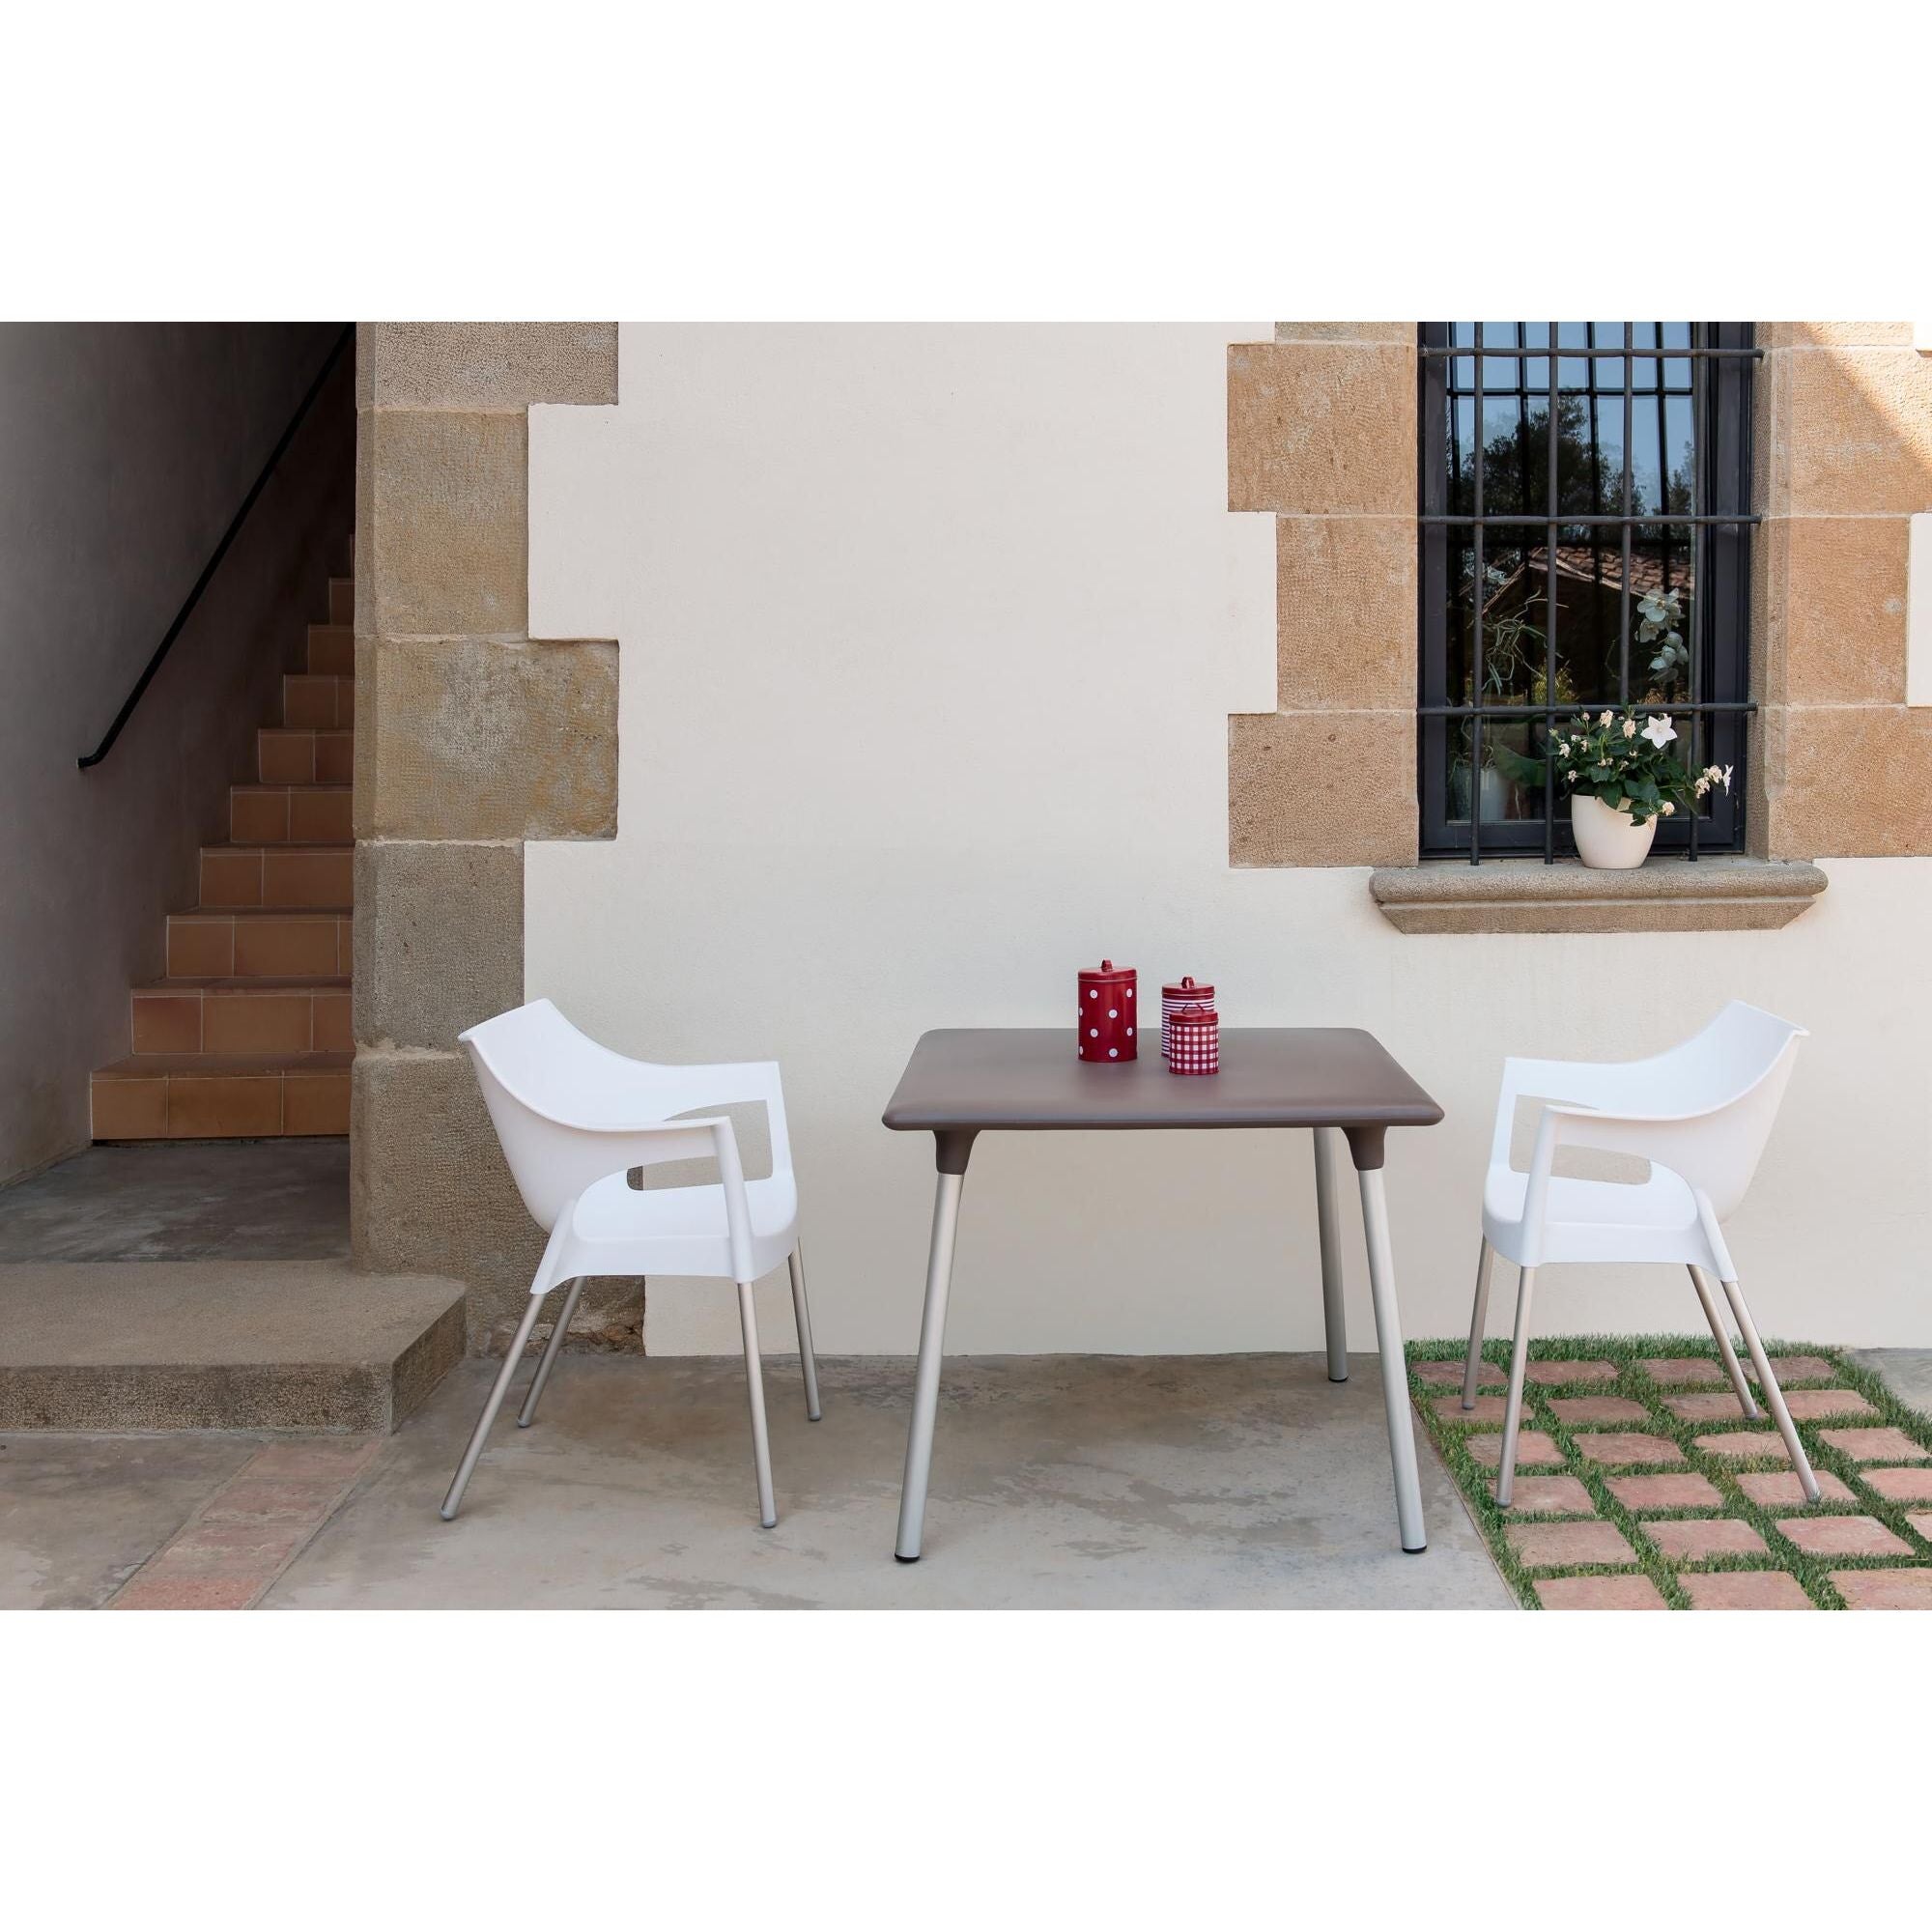 Resol new flash square table indoors, outdoors 90x90